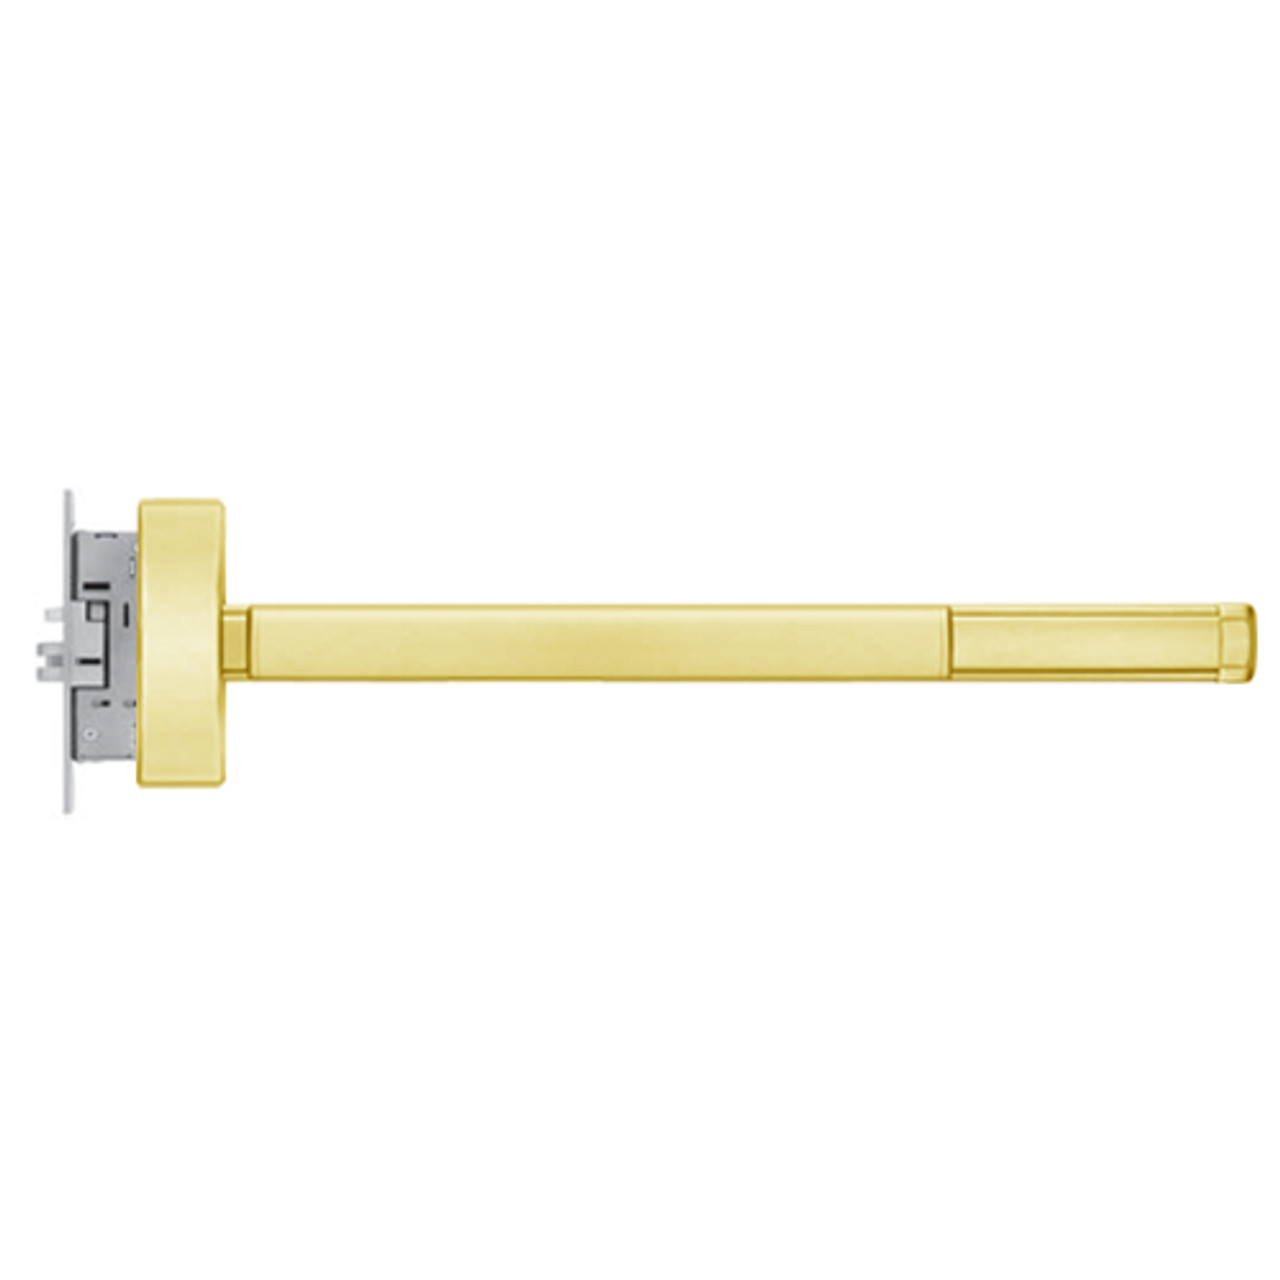 TS2305-RHR-605-48 PHI 2300 Series Apex Mortise Exit Device with Touchbar Monitoring Switch Prepped for Key Controls Thumb Piece in Bright Brass Finish